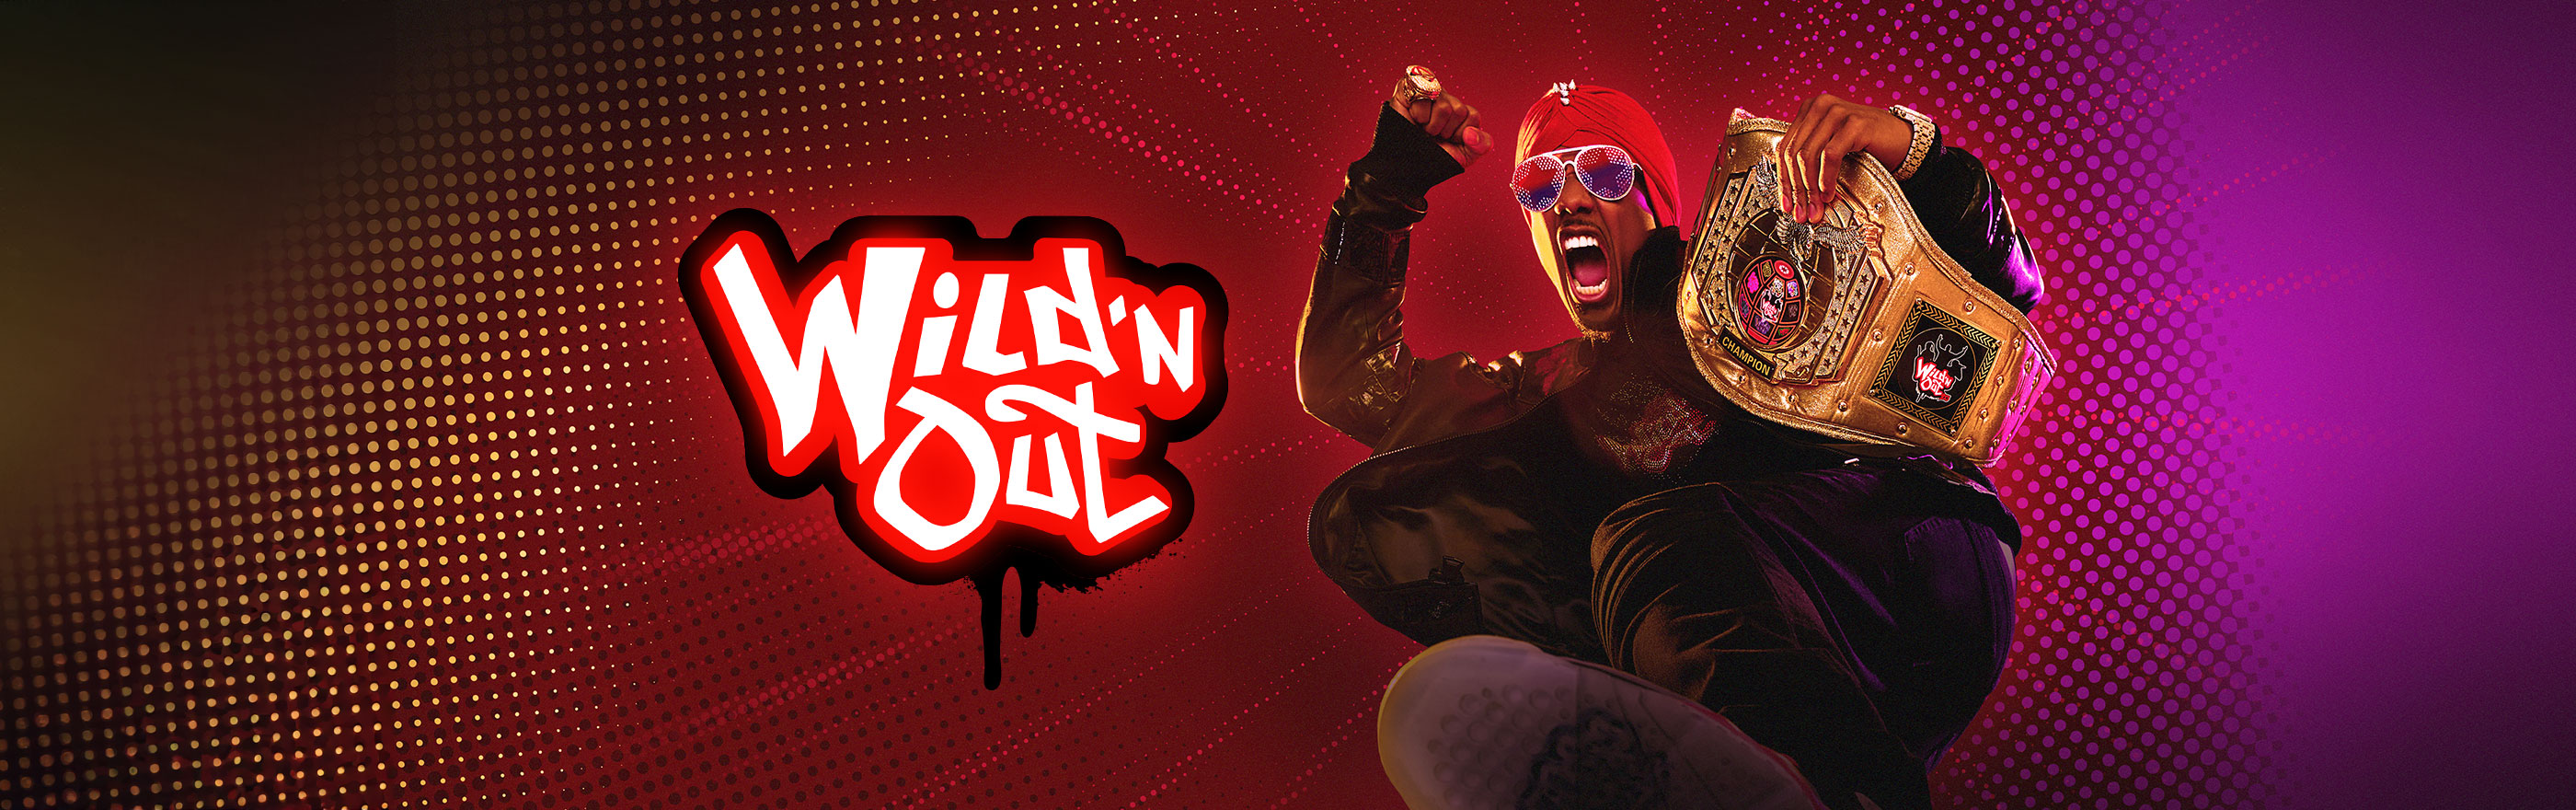 Nick Cannon Presents: Wild 'N Out LOGO